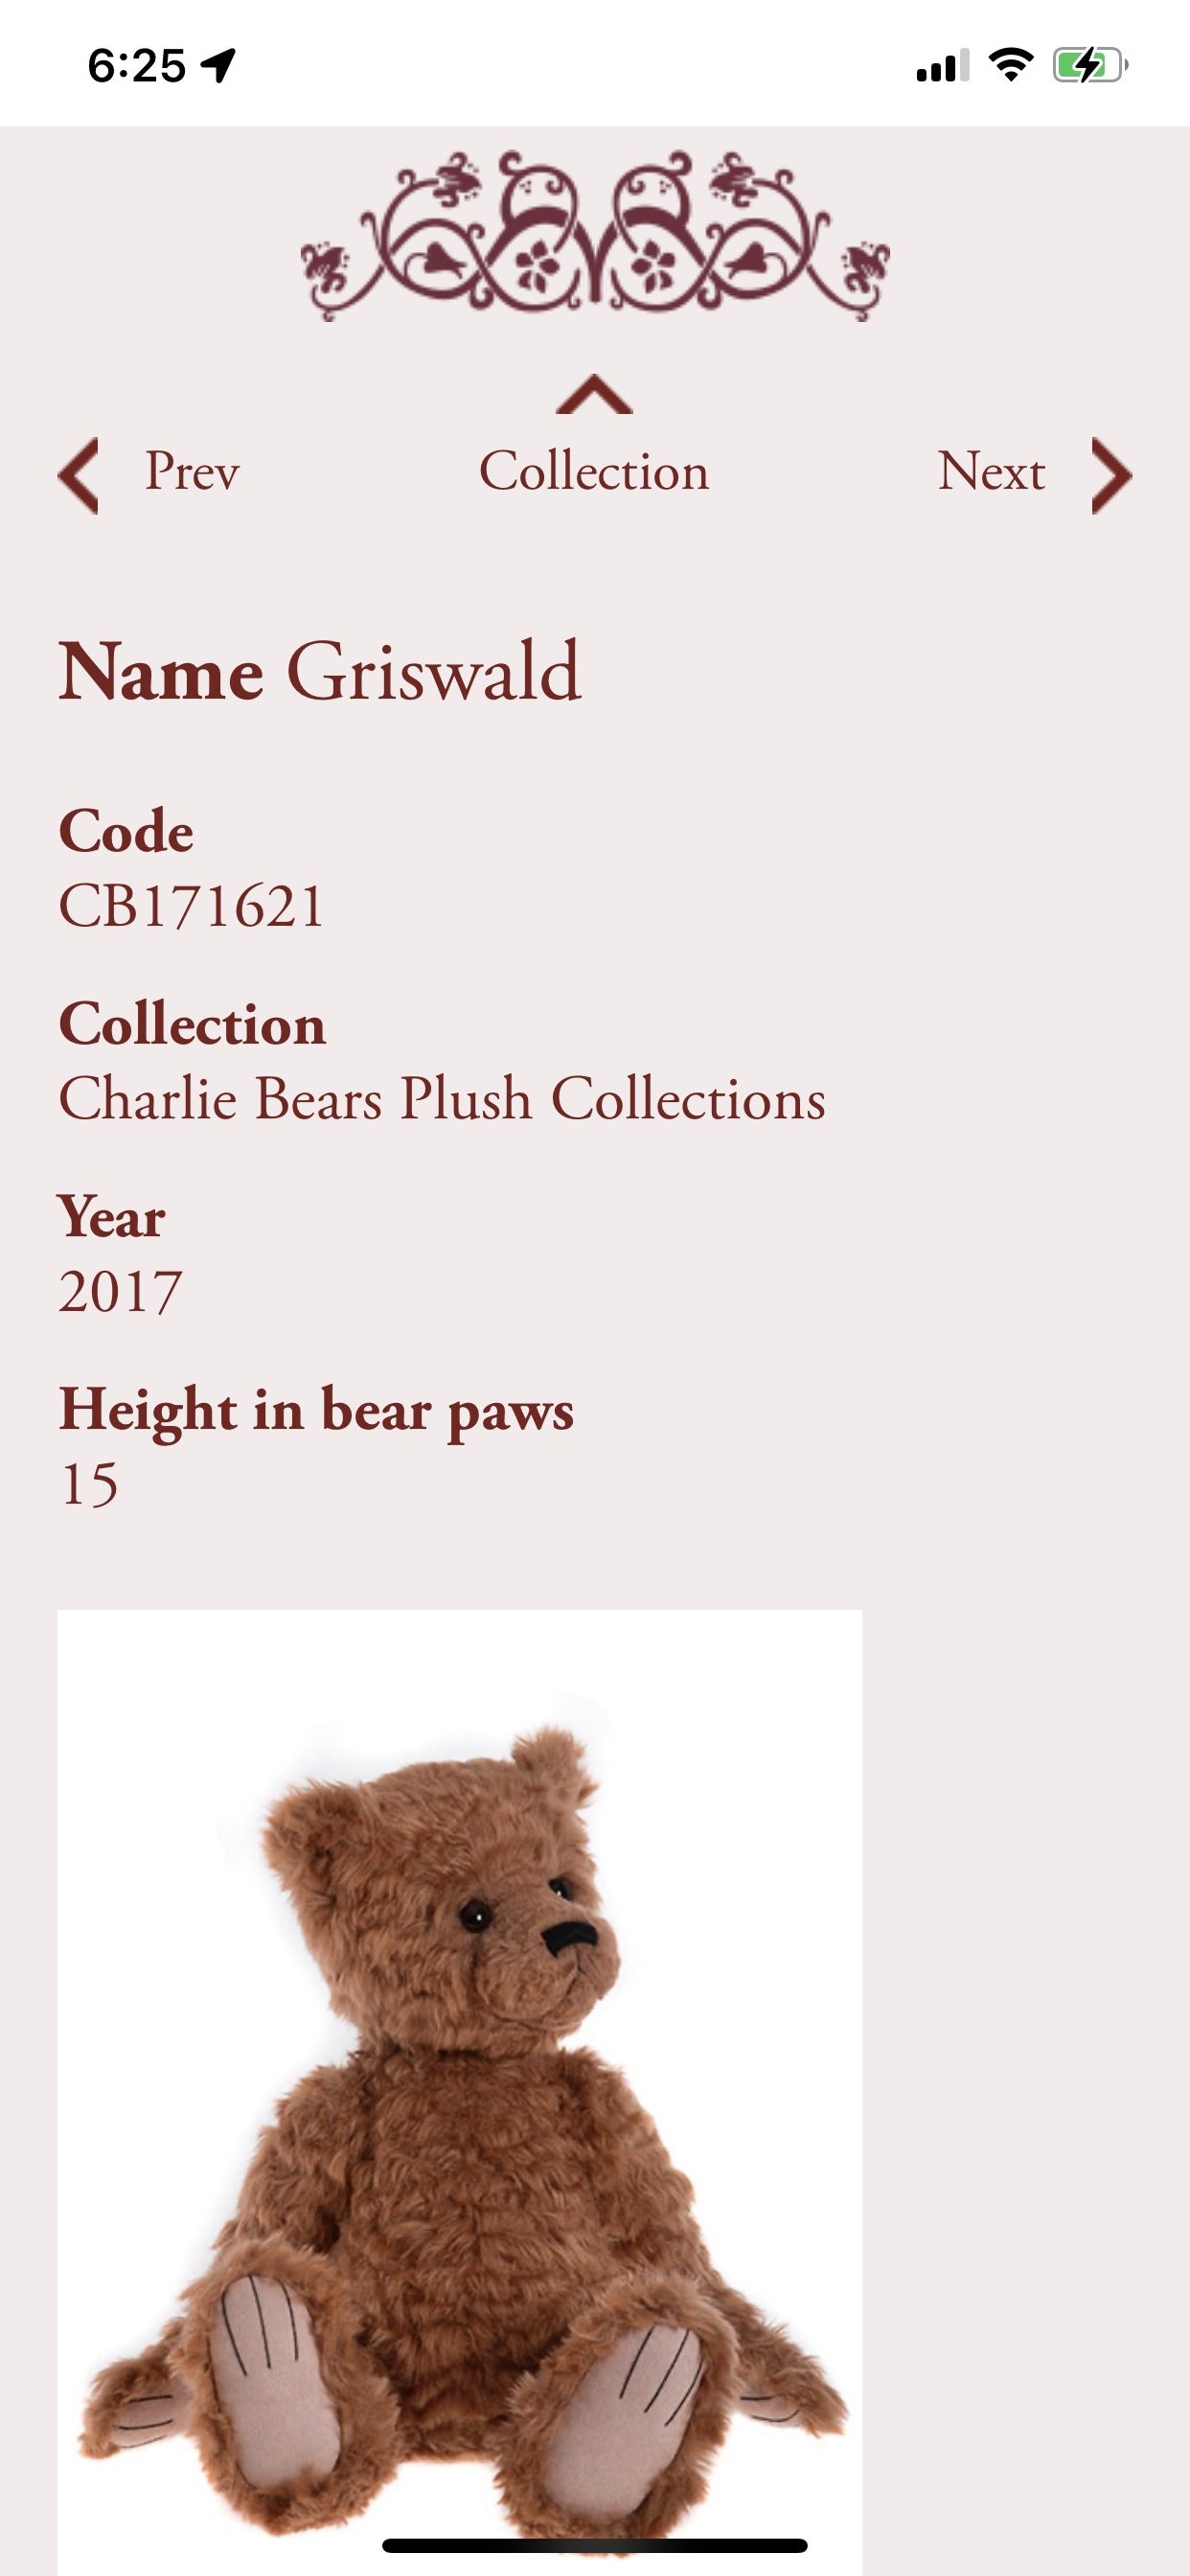 Charlie Bear - growling Griswald by Heather Lyell 2017 collection